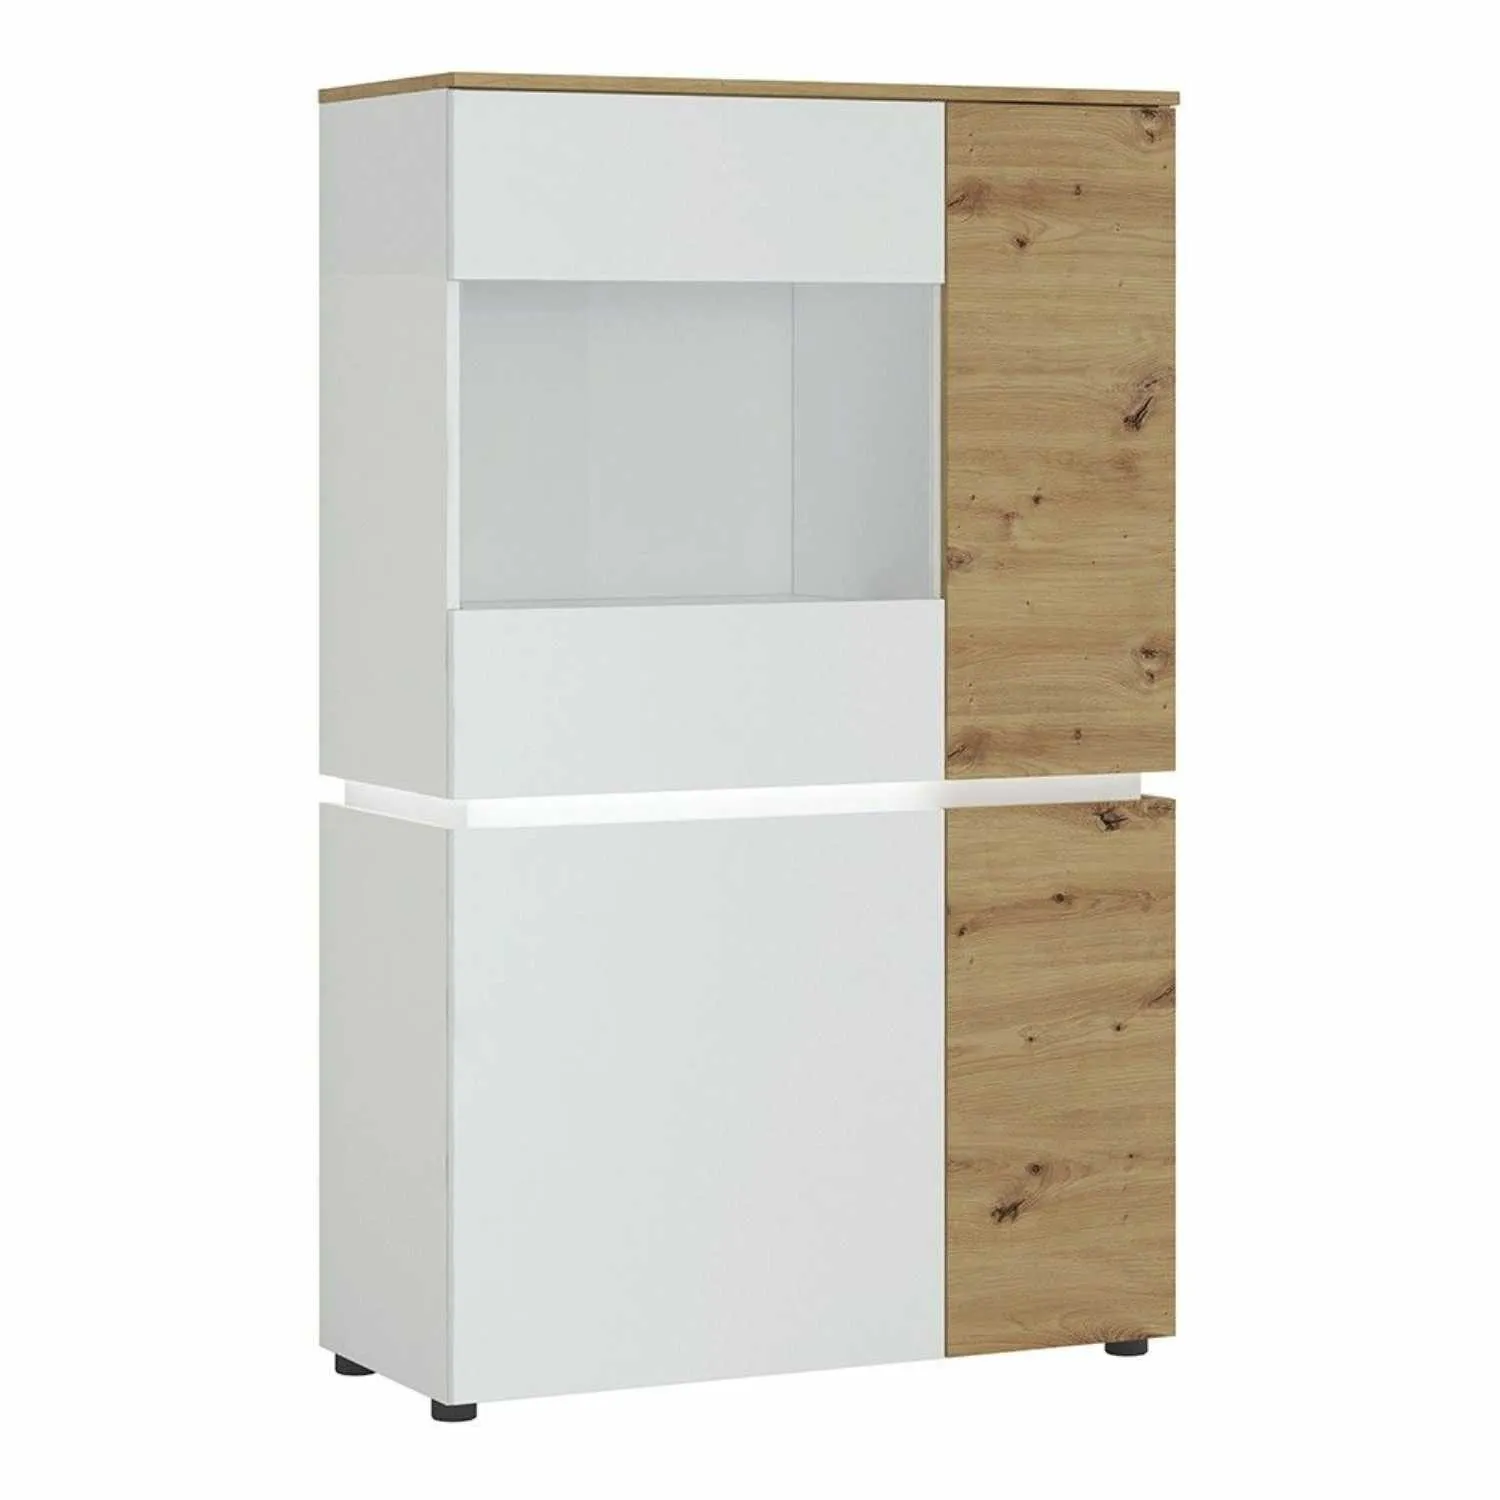 Luci 4 door low display cabinet in White and Oak